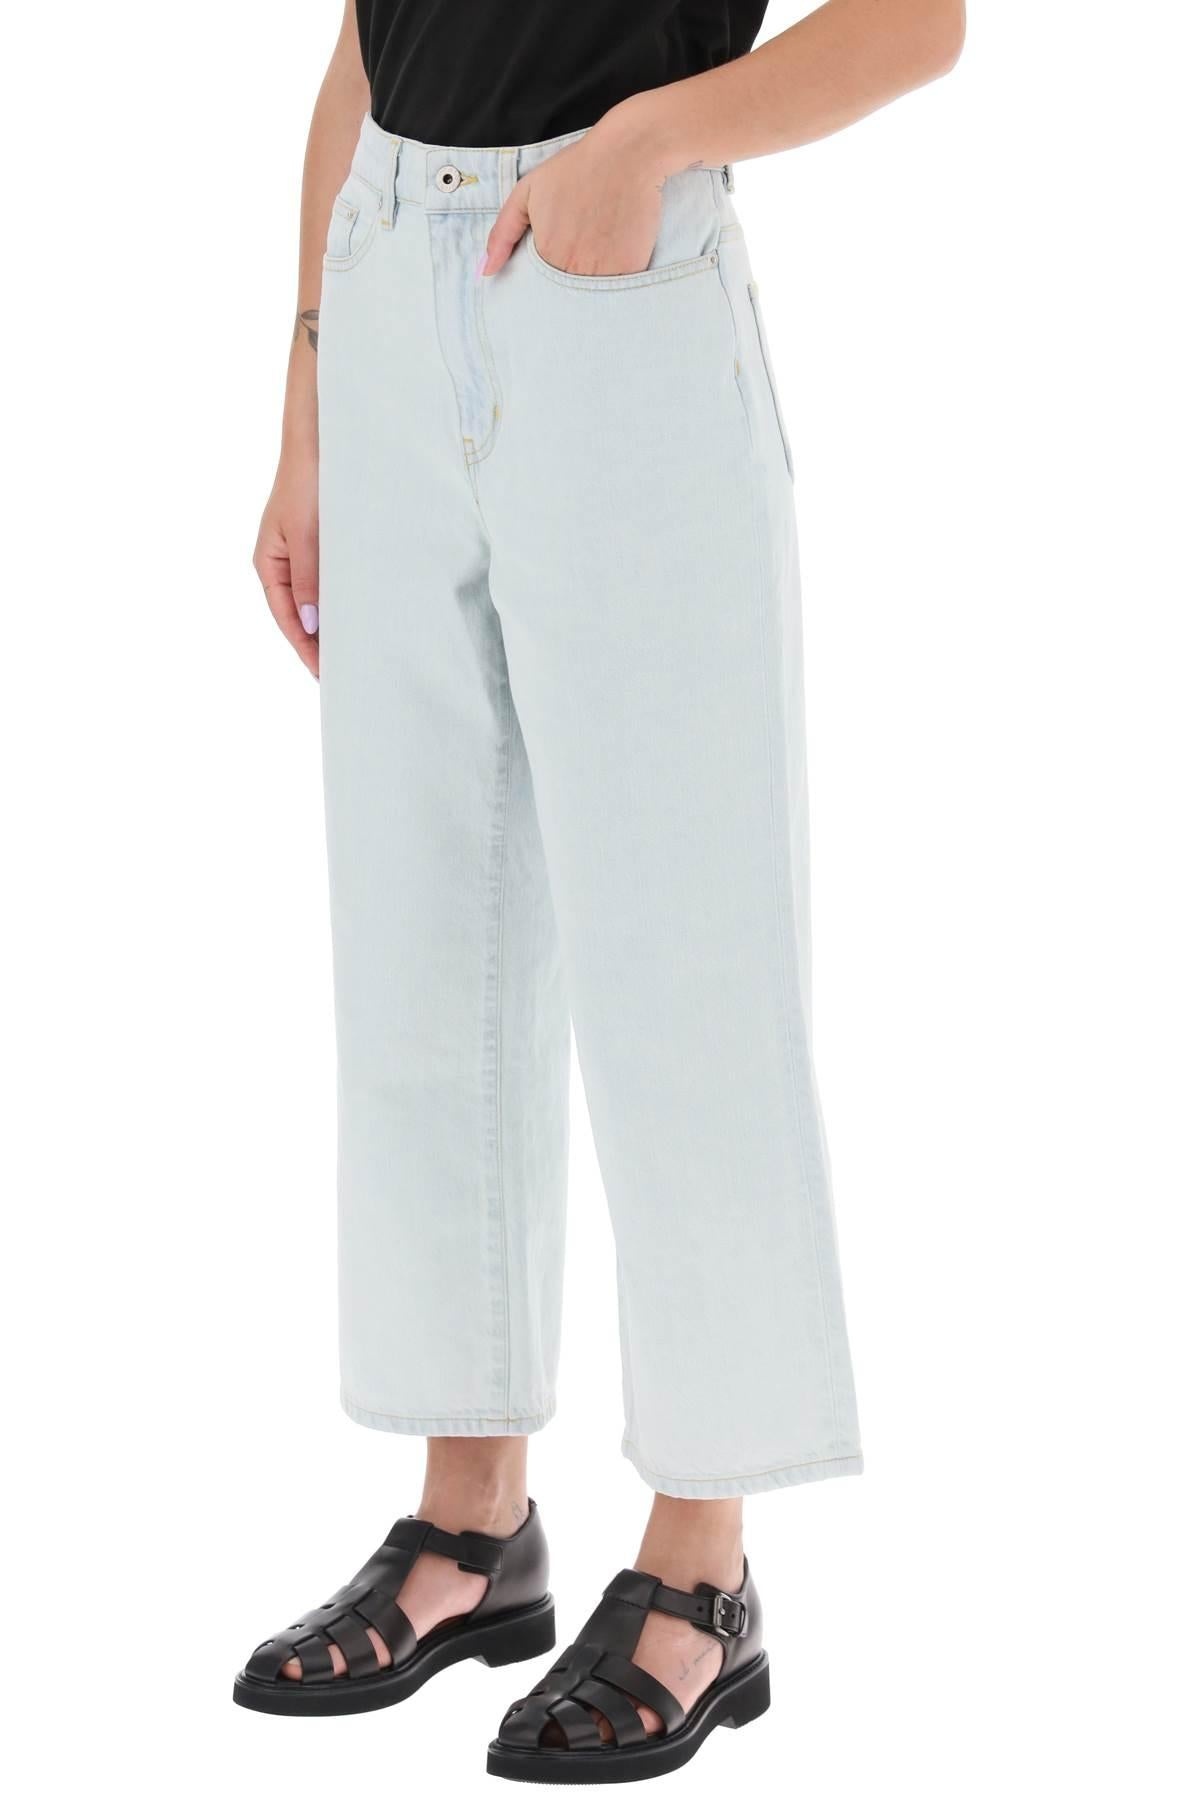 Kenzo 'Sumire' Cropped Jeans With Wide Leg - 5